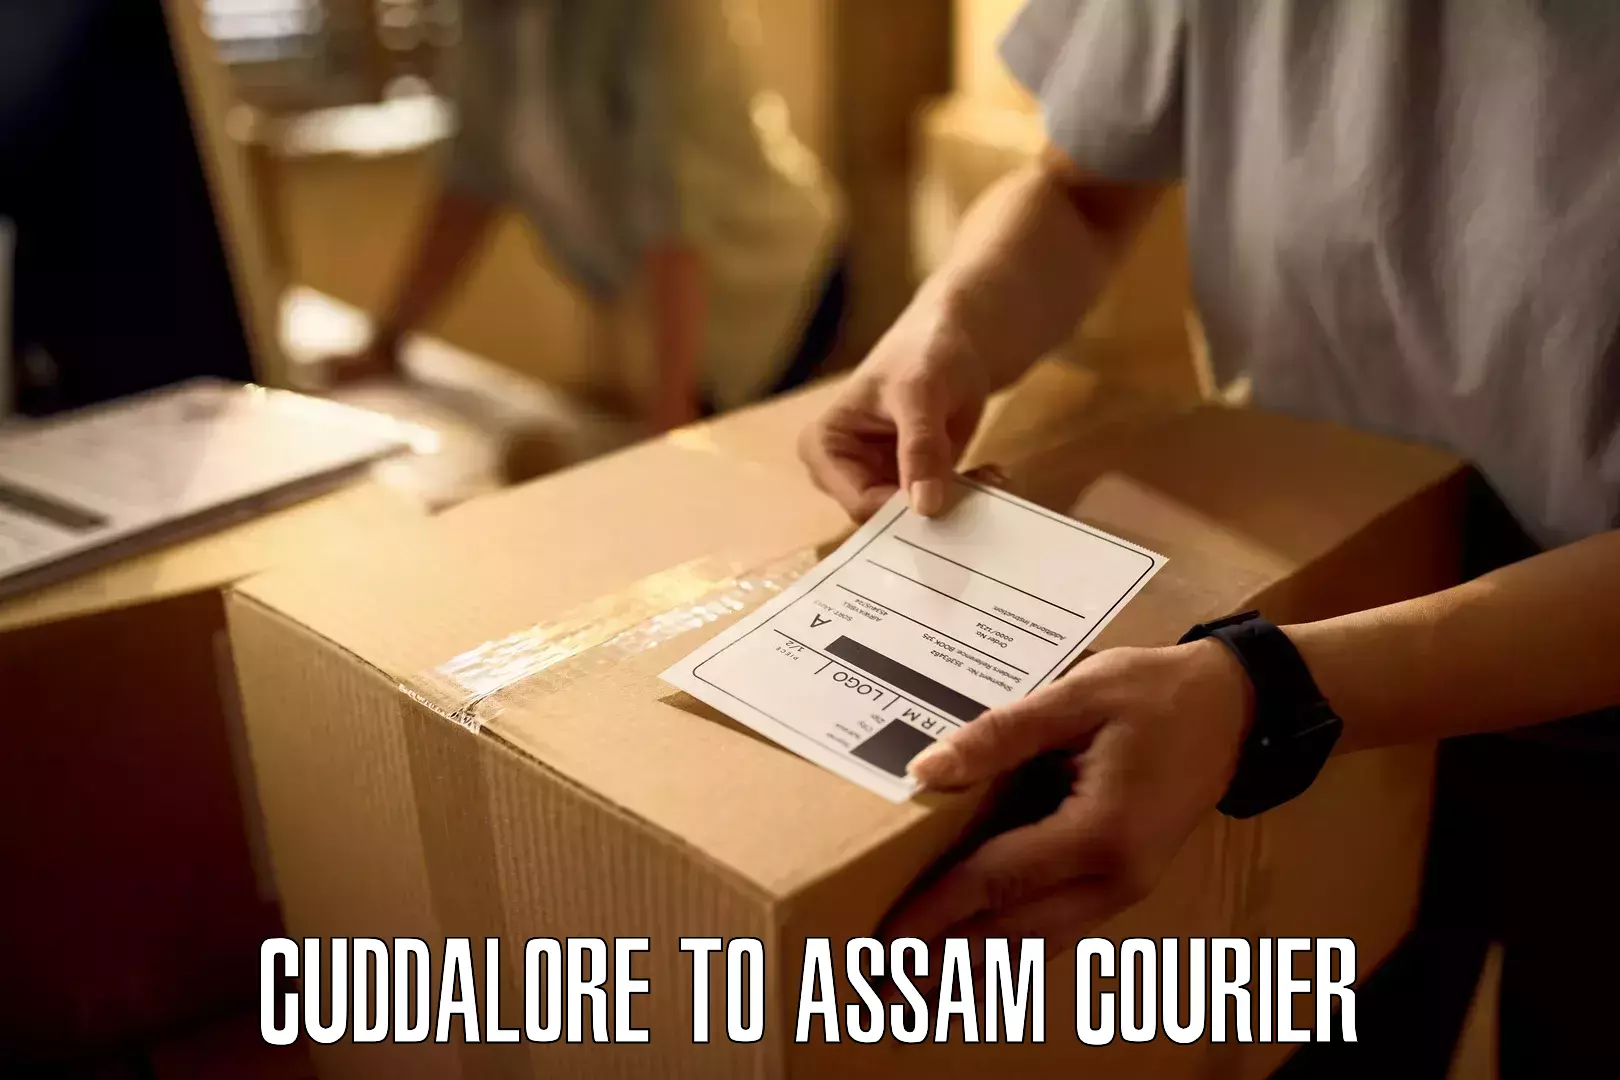 Shipping and handling Cuddalore to Assam